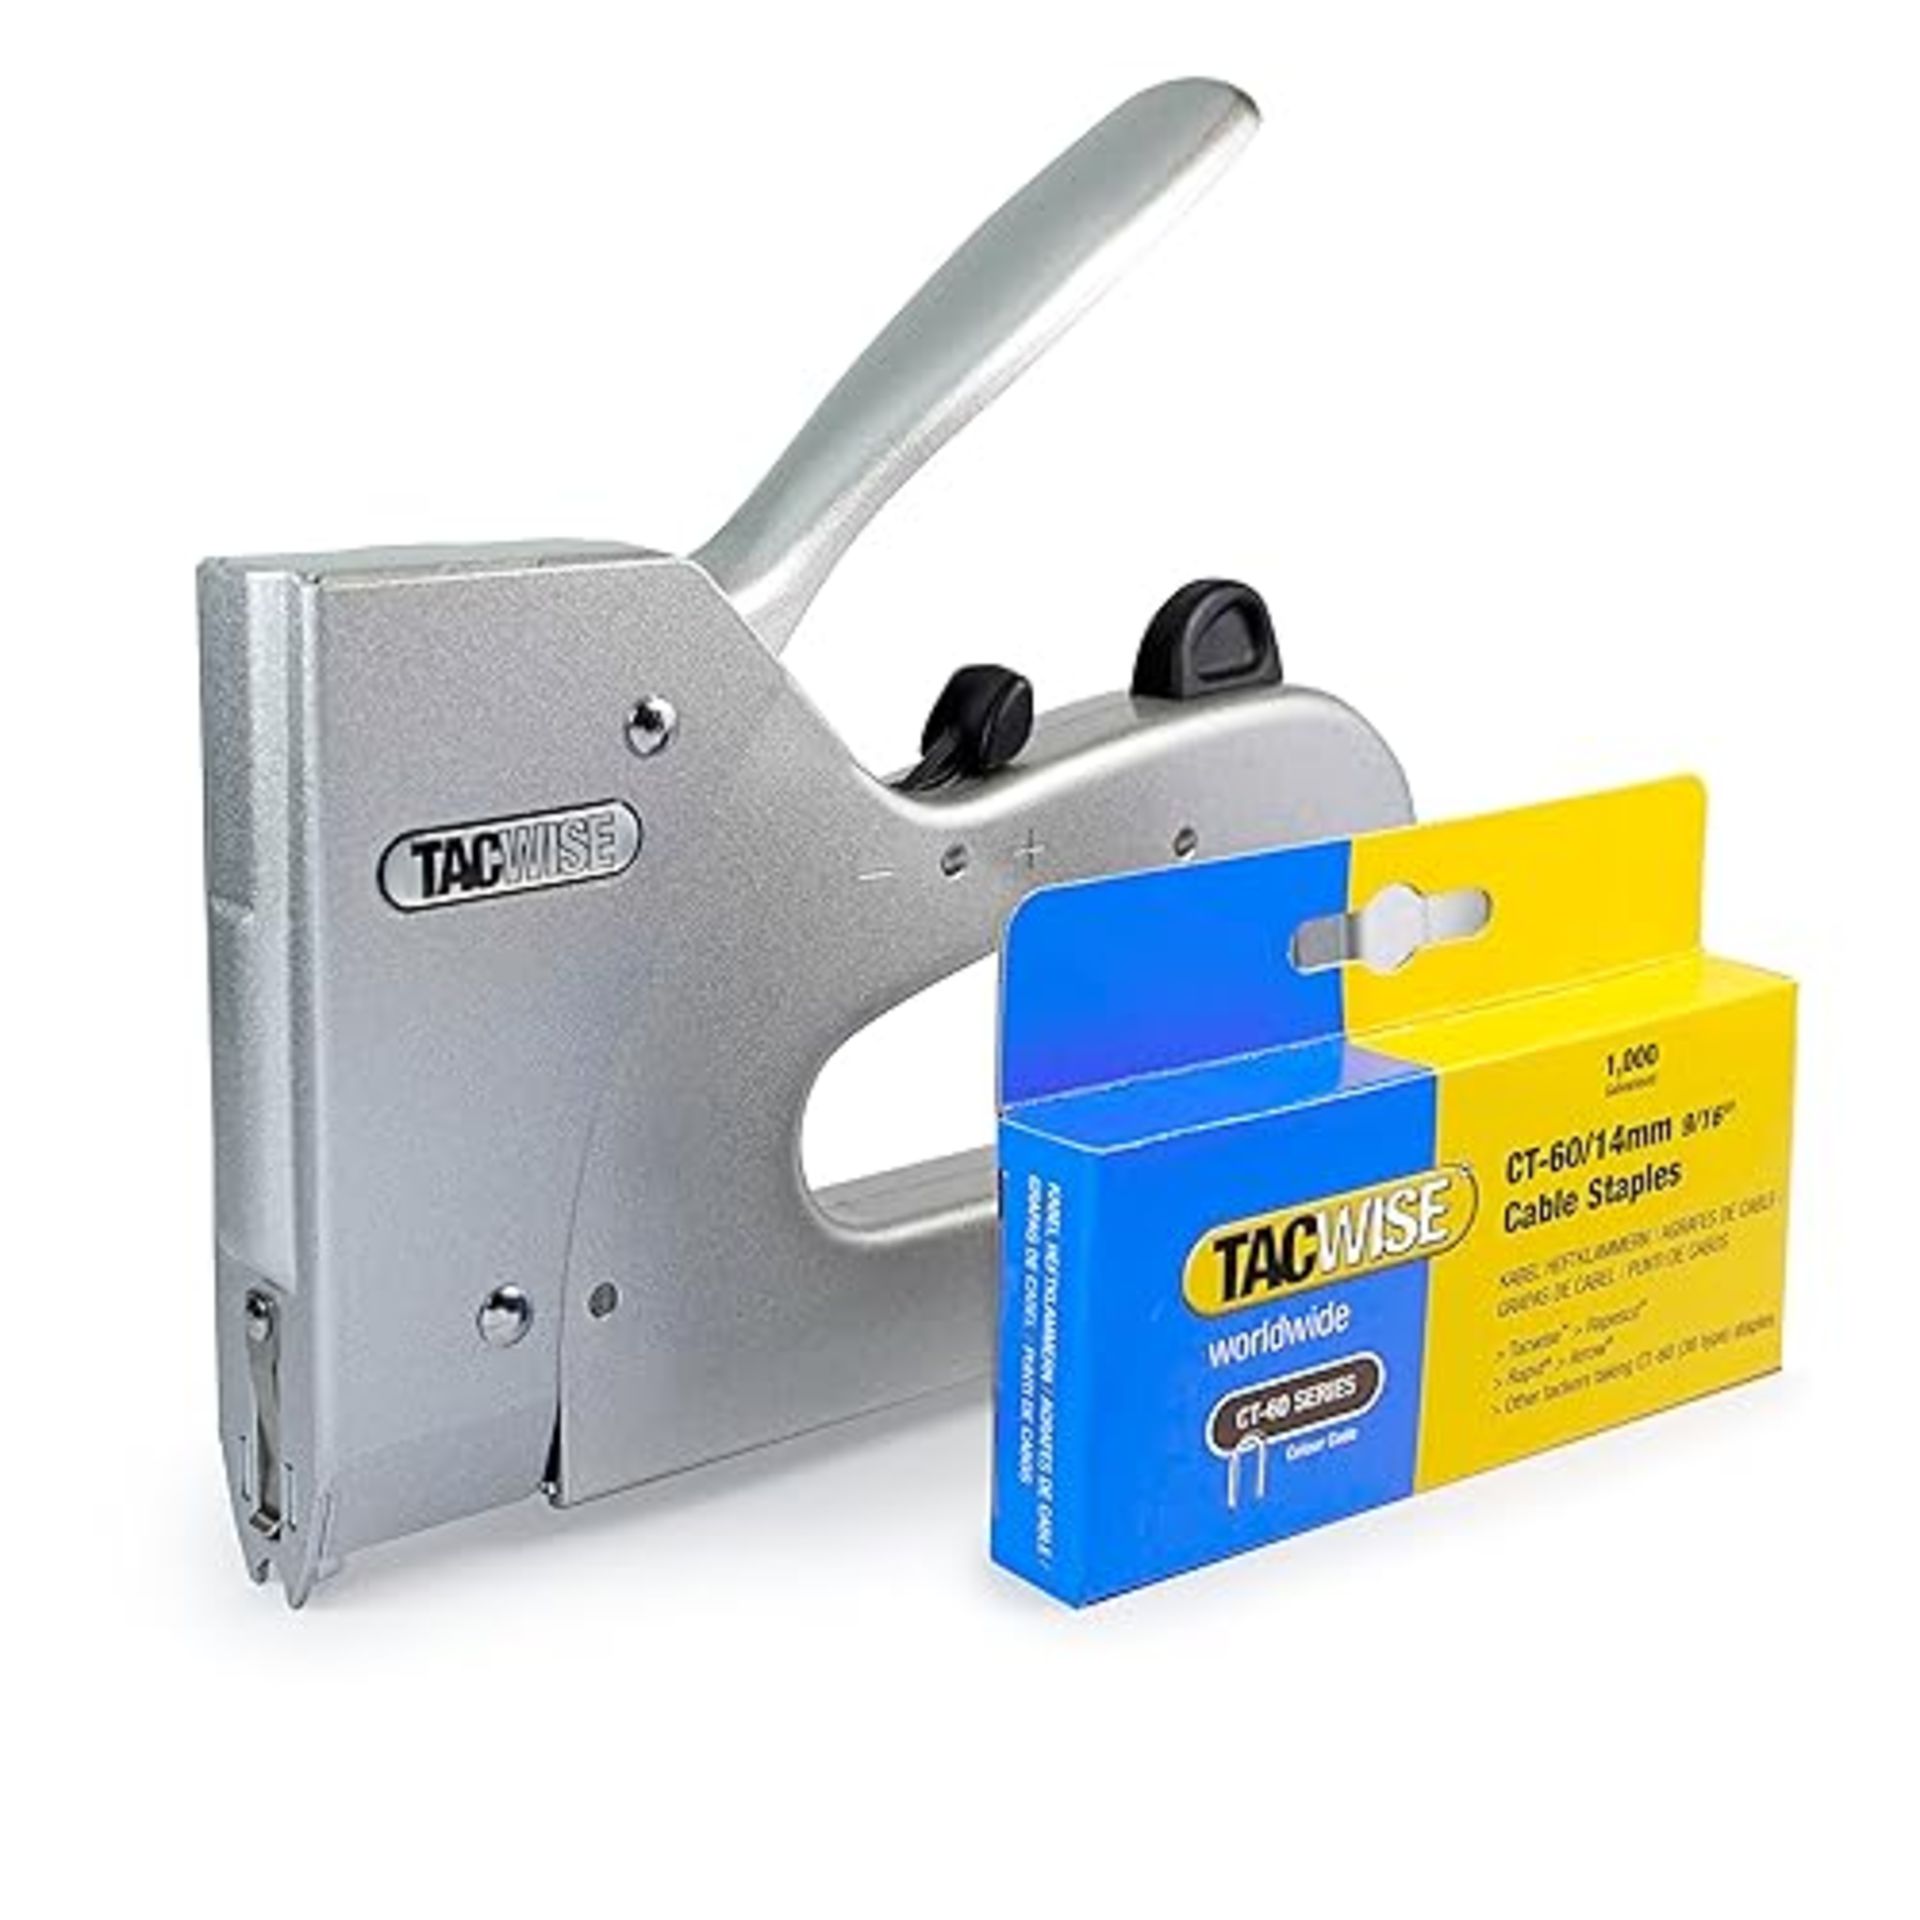 Tacwise 1247 All-Metal Combi Cable Tacker with 1,000 Staples Uses Type CT-45 & CT-60 Staples